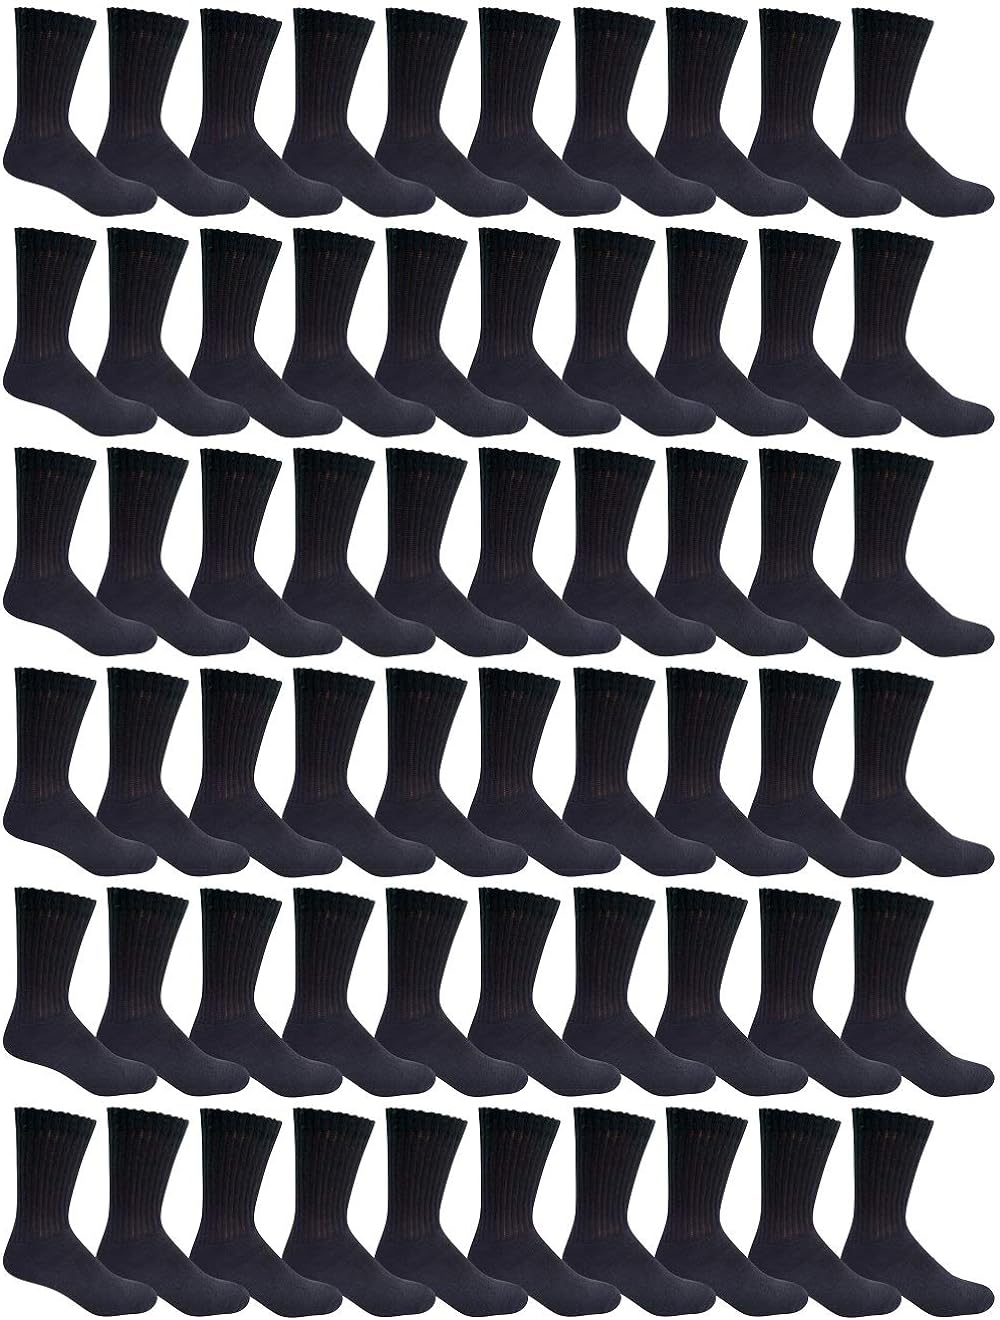 Yacht & Smith 180 Pairs Case of Mens Sports Crew Socks, King Size 13-16, Wholesale Bulk Pack Athletic Sock, by WSD (Black)